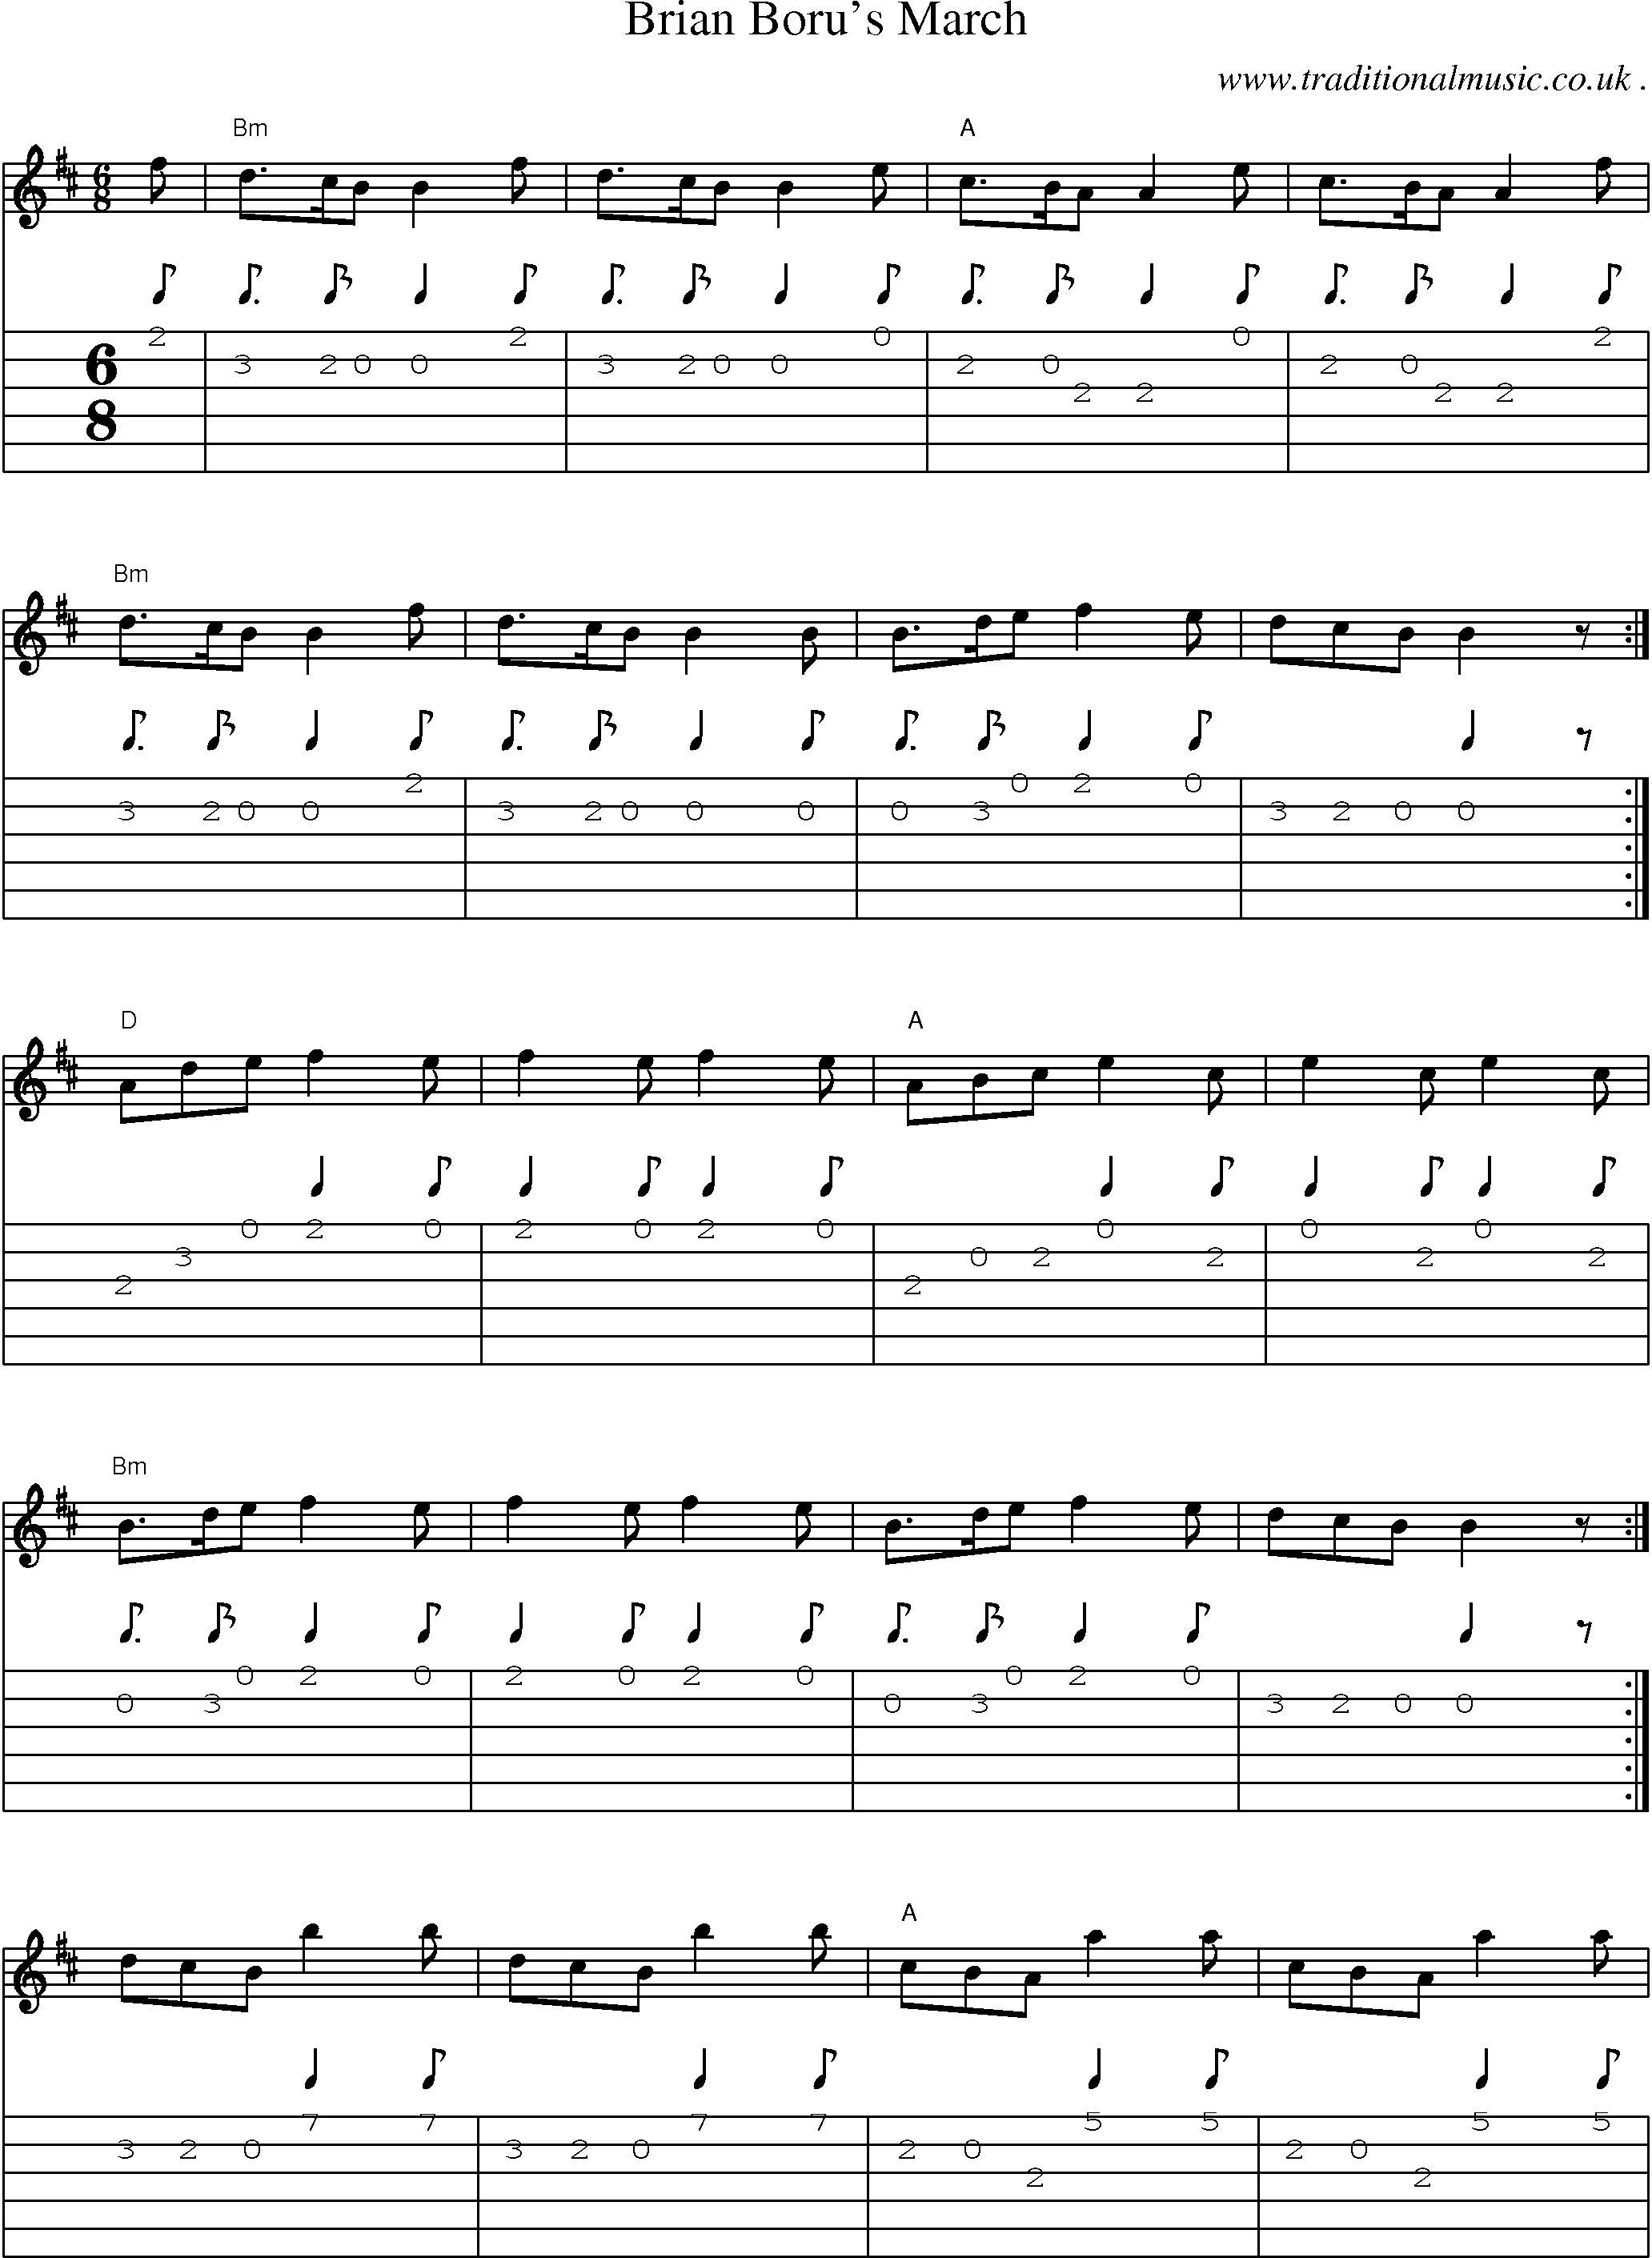 Sheet-Music and Guitar Tabs for Brian Borus March